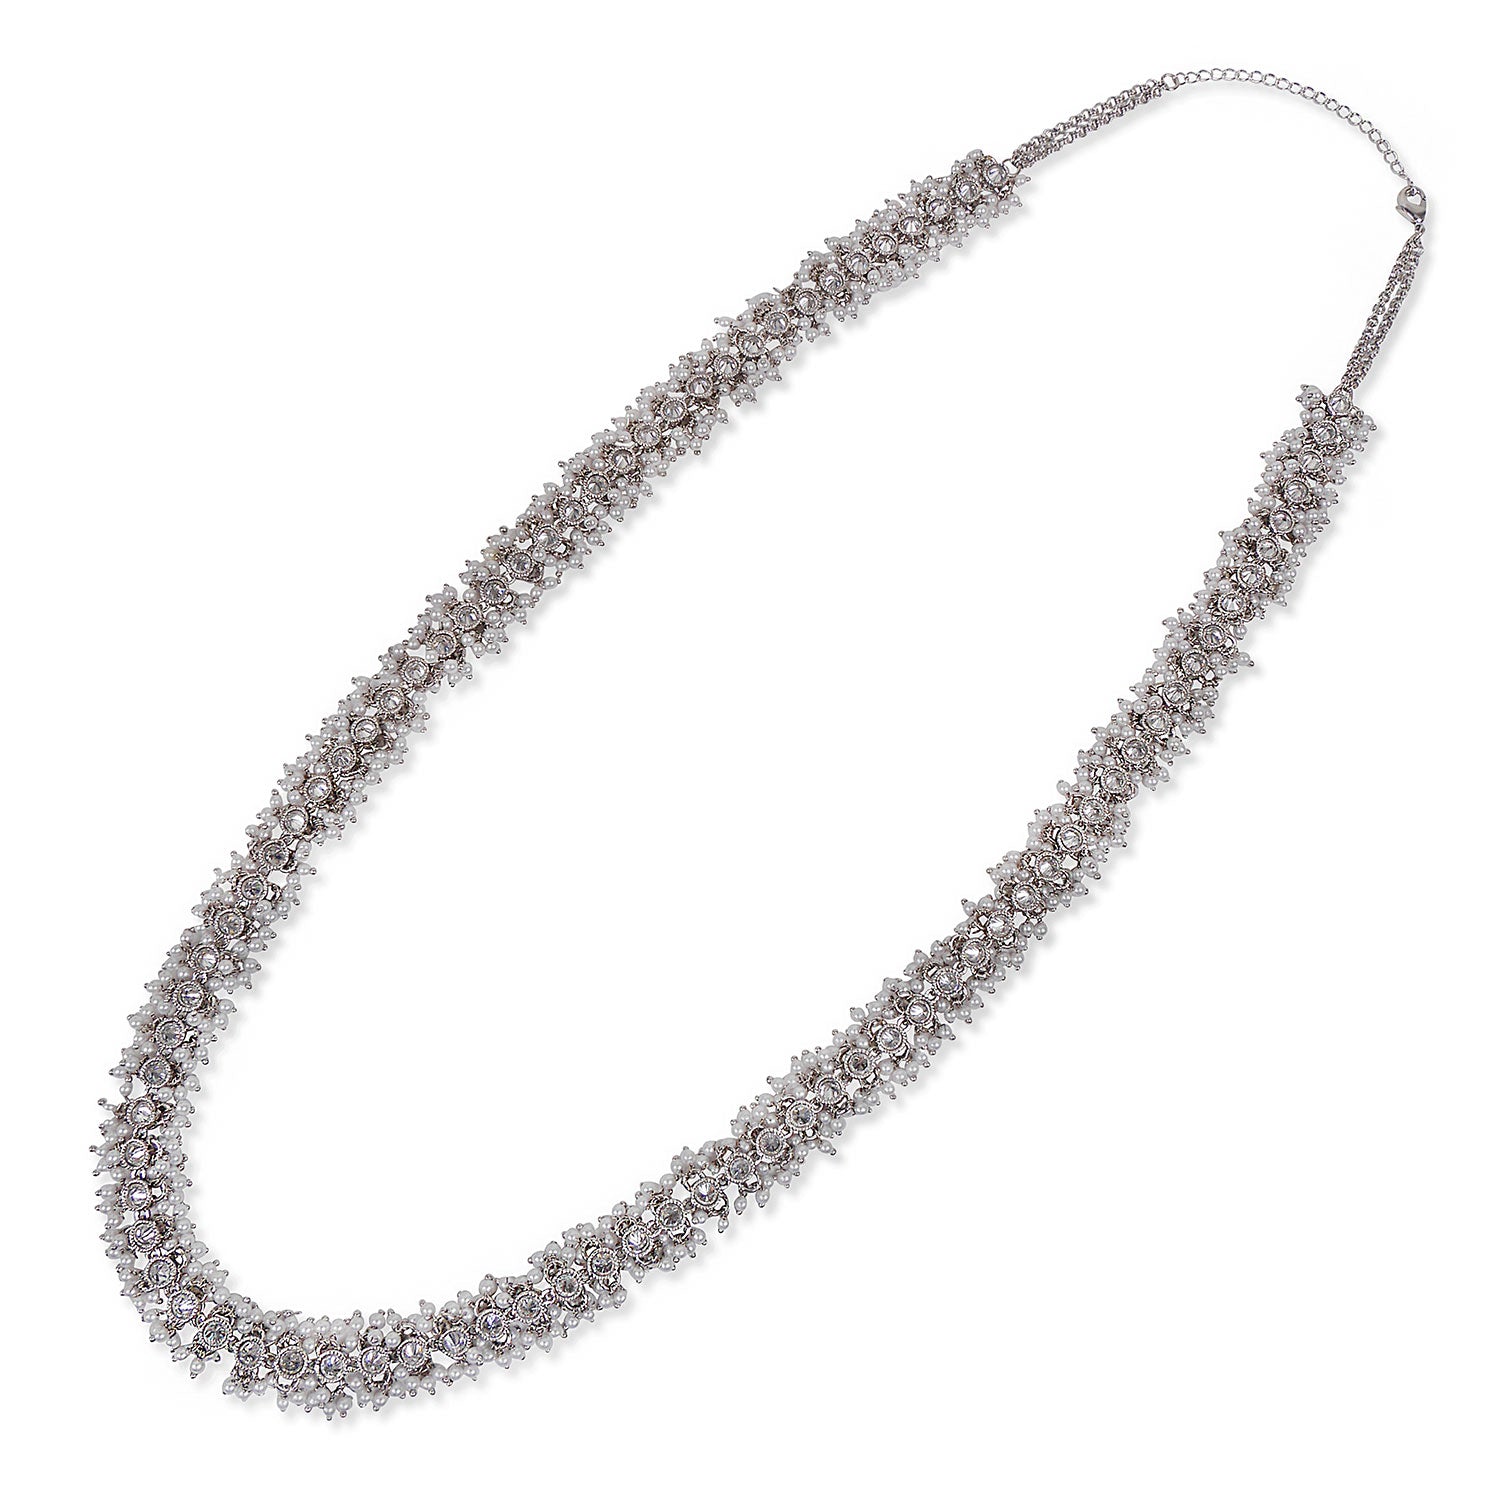 Laila Pearl Cluster Necklace in Rhodium